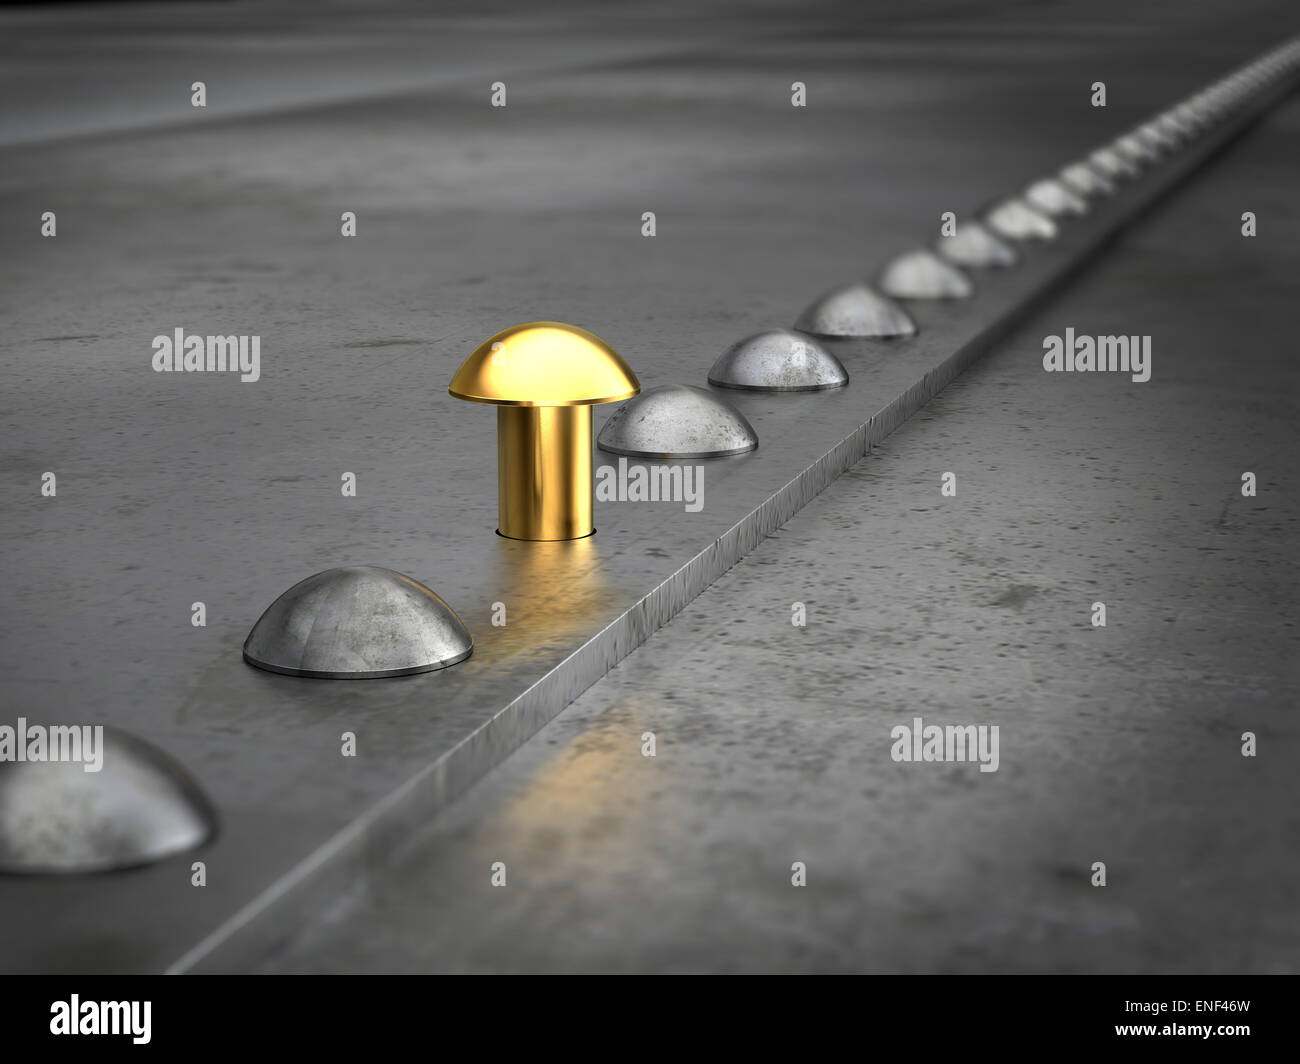 Row of rivets on the metal grunge background. One golden rivet in the row. Leadership concept. Stock Photo